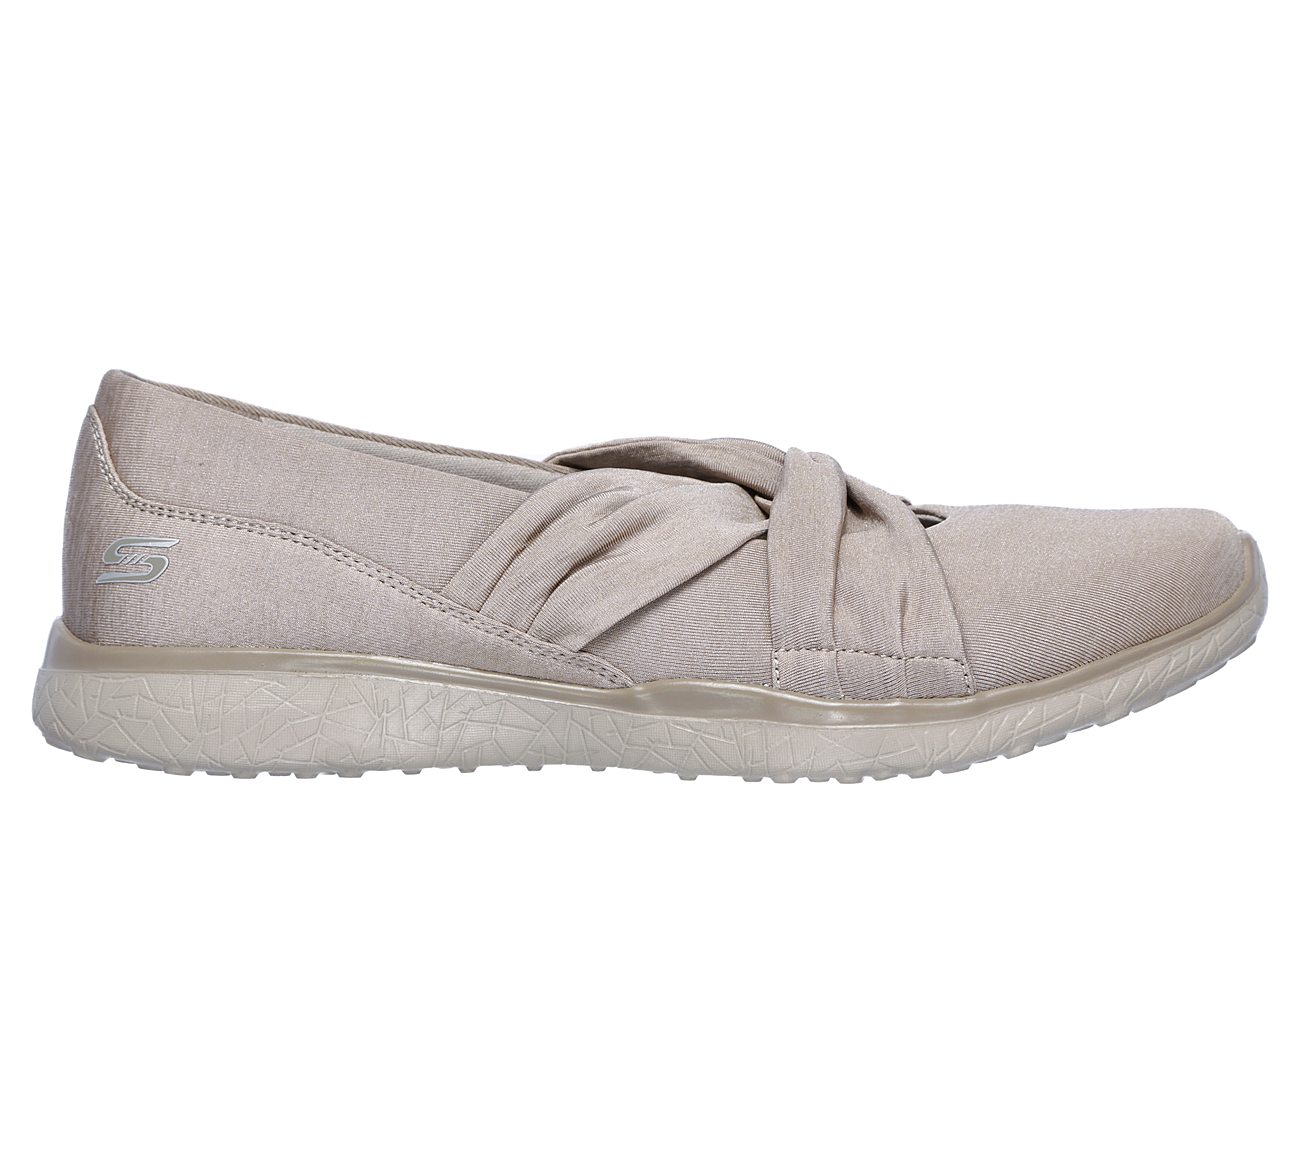 skechers microburst knot concerned women's shoes